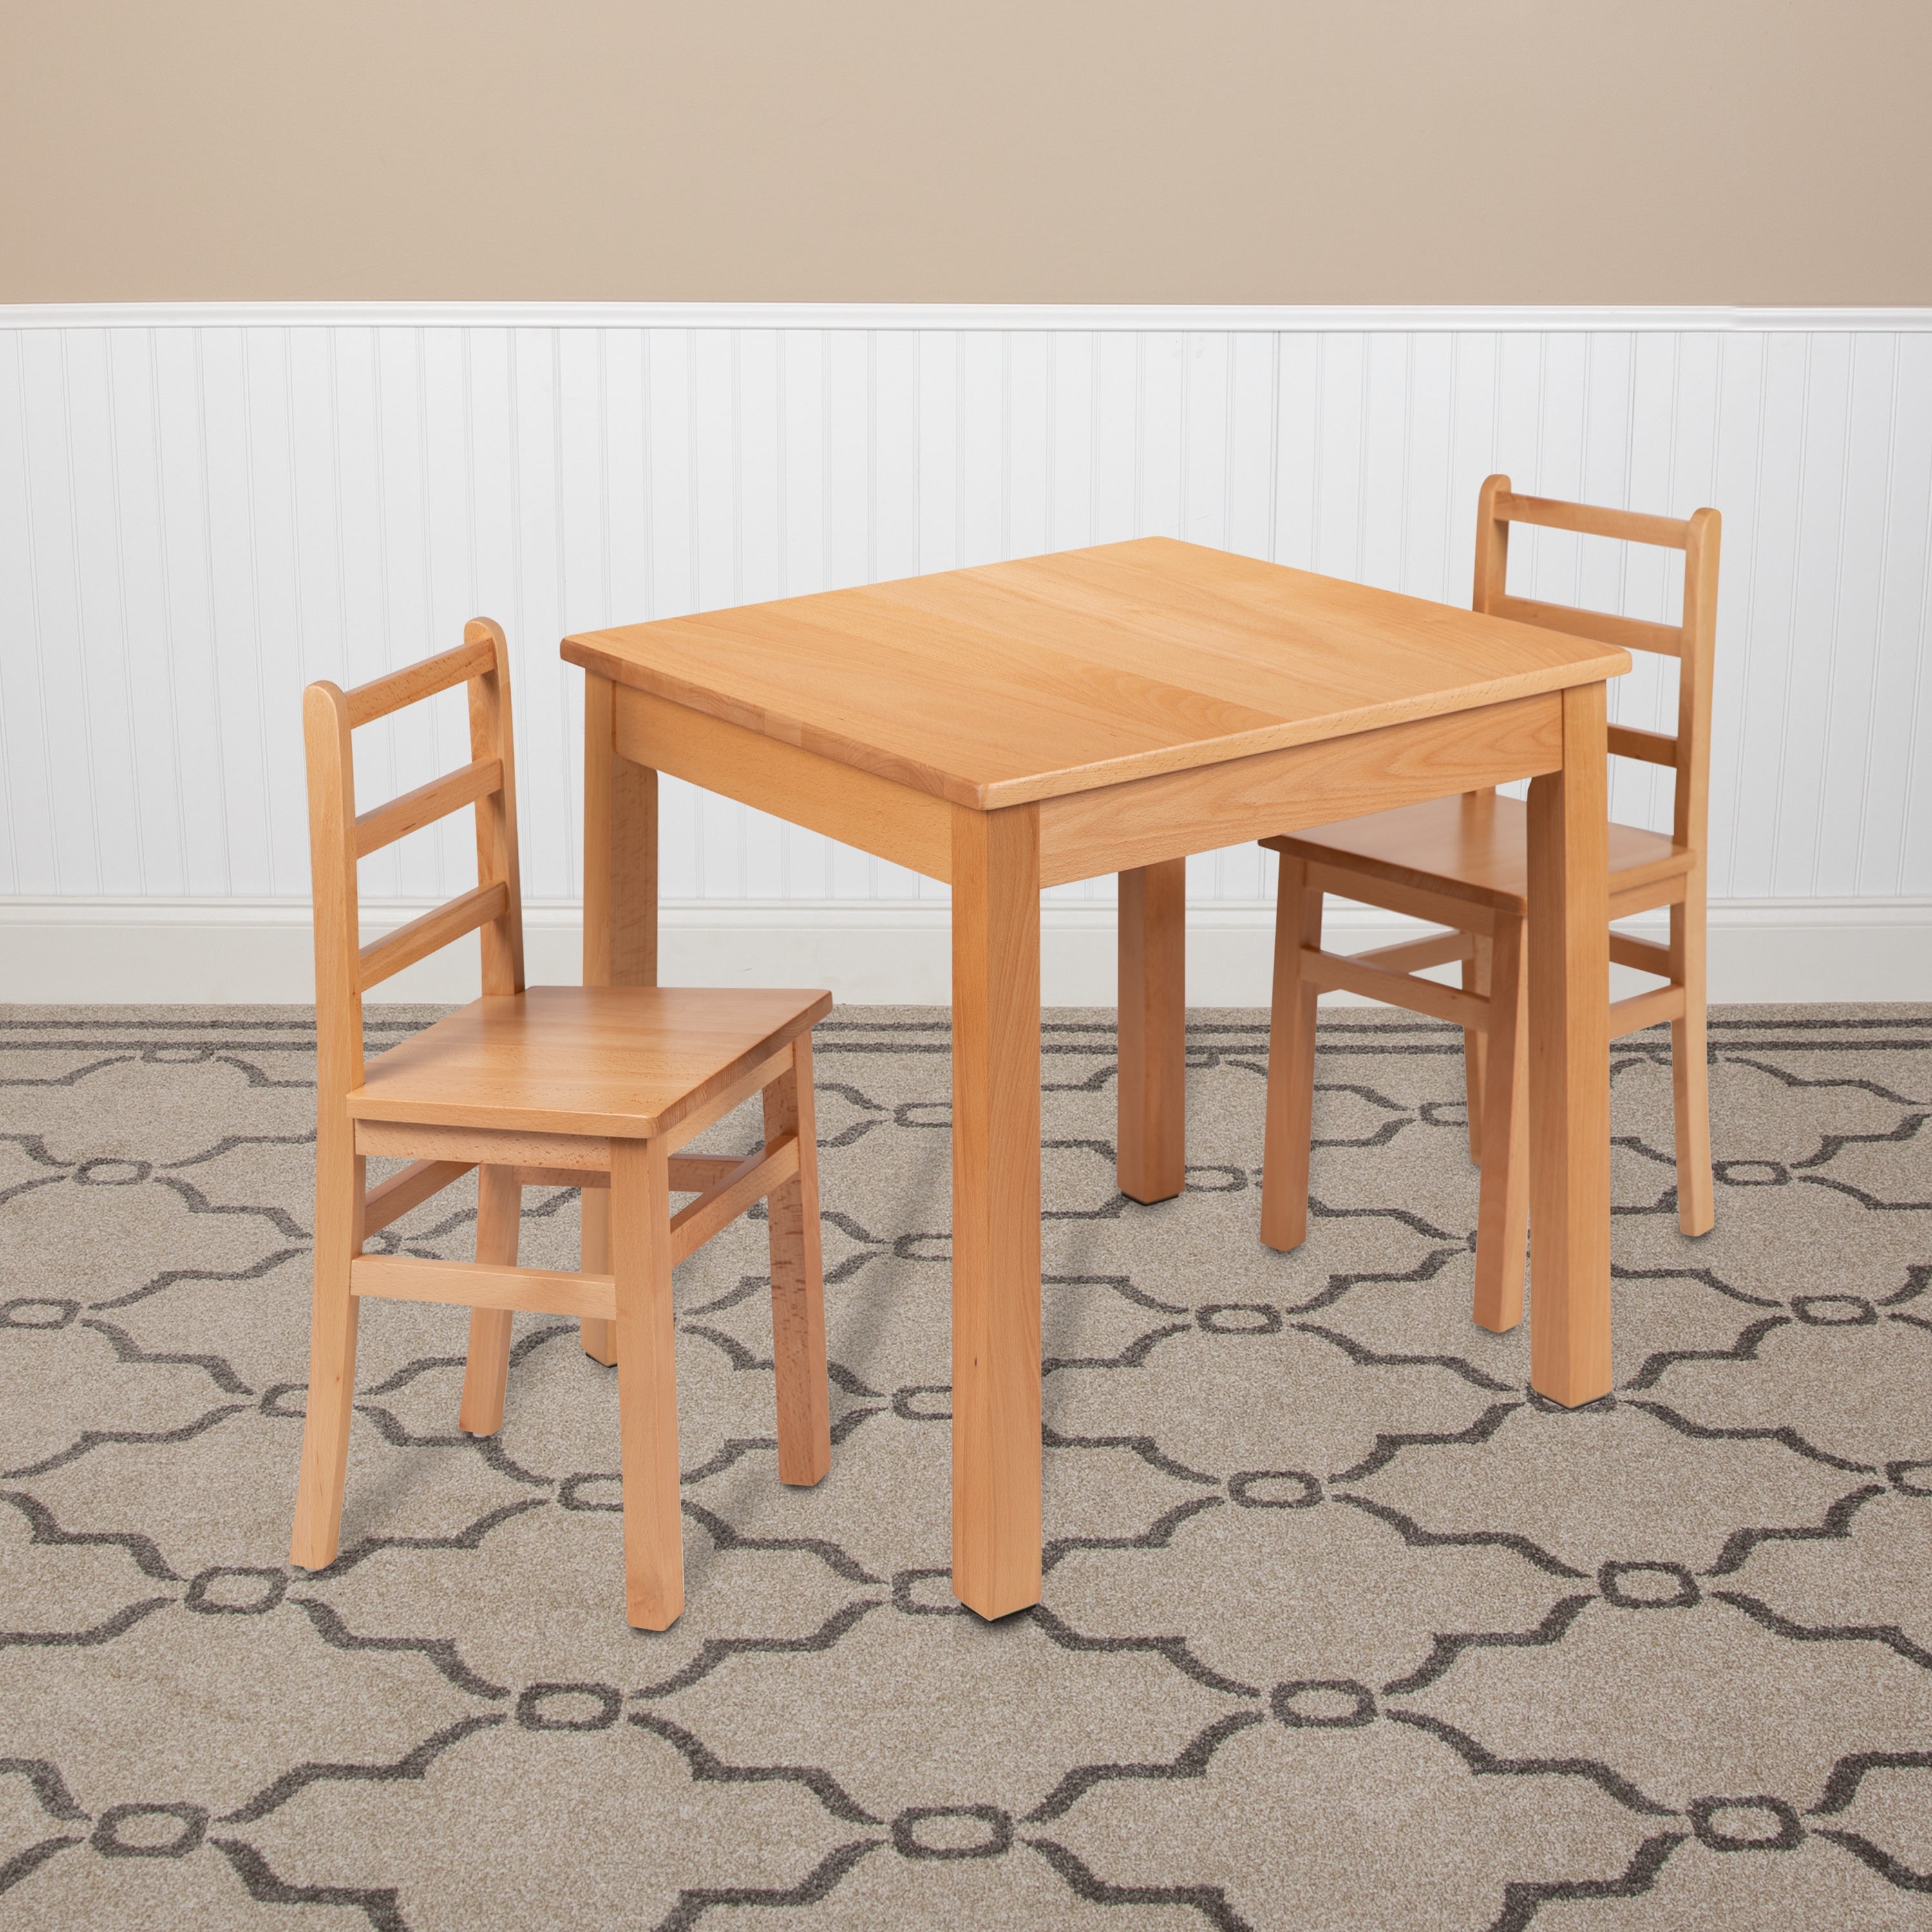 Kids Natural Solid Wood Table And Chair Set For Classroom